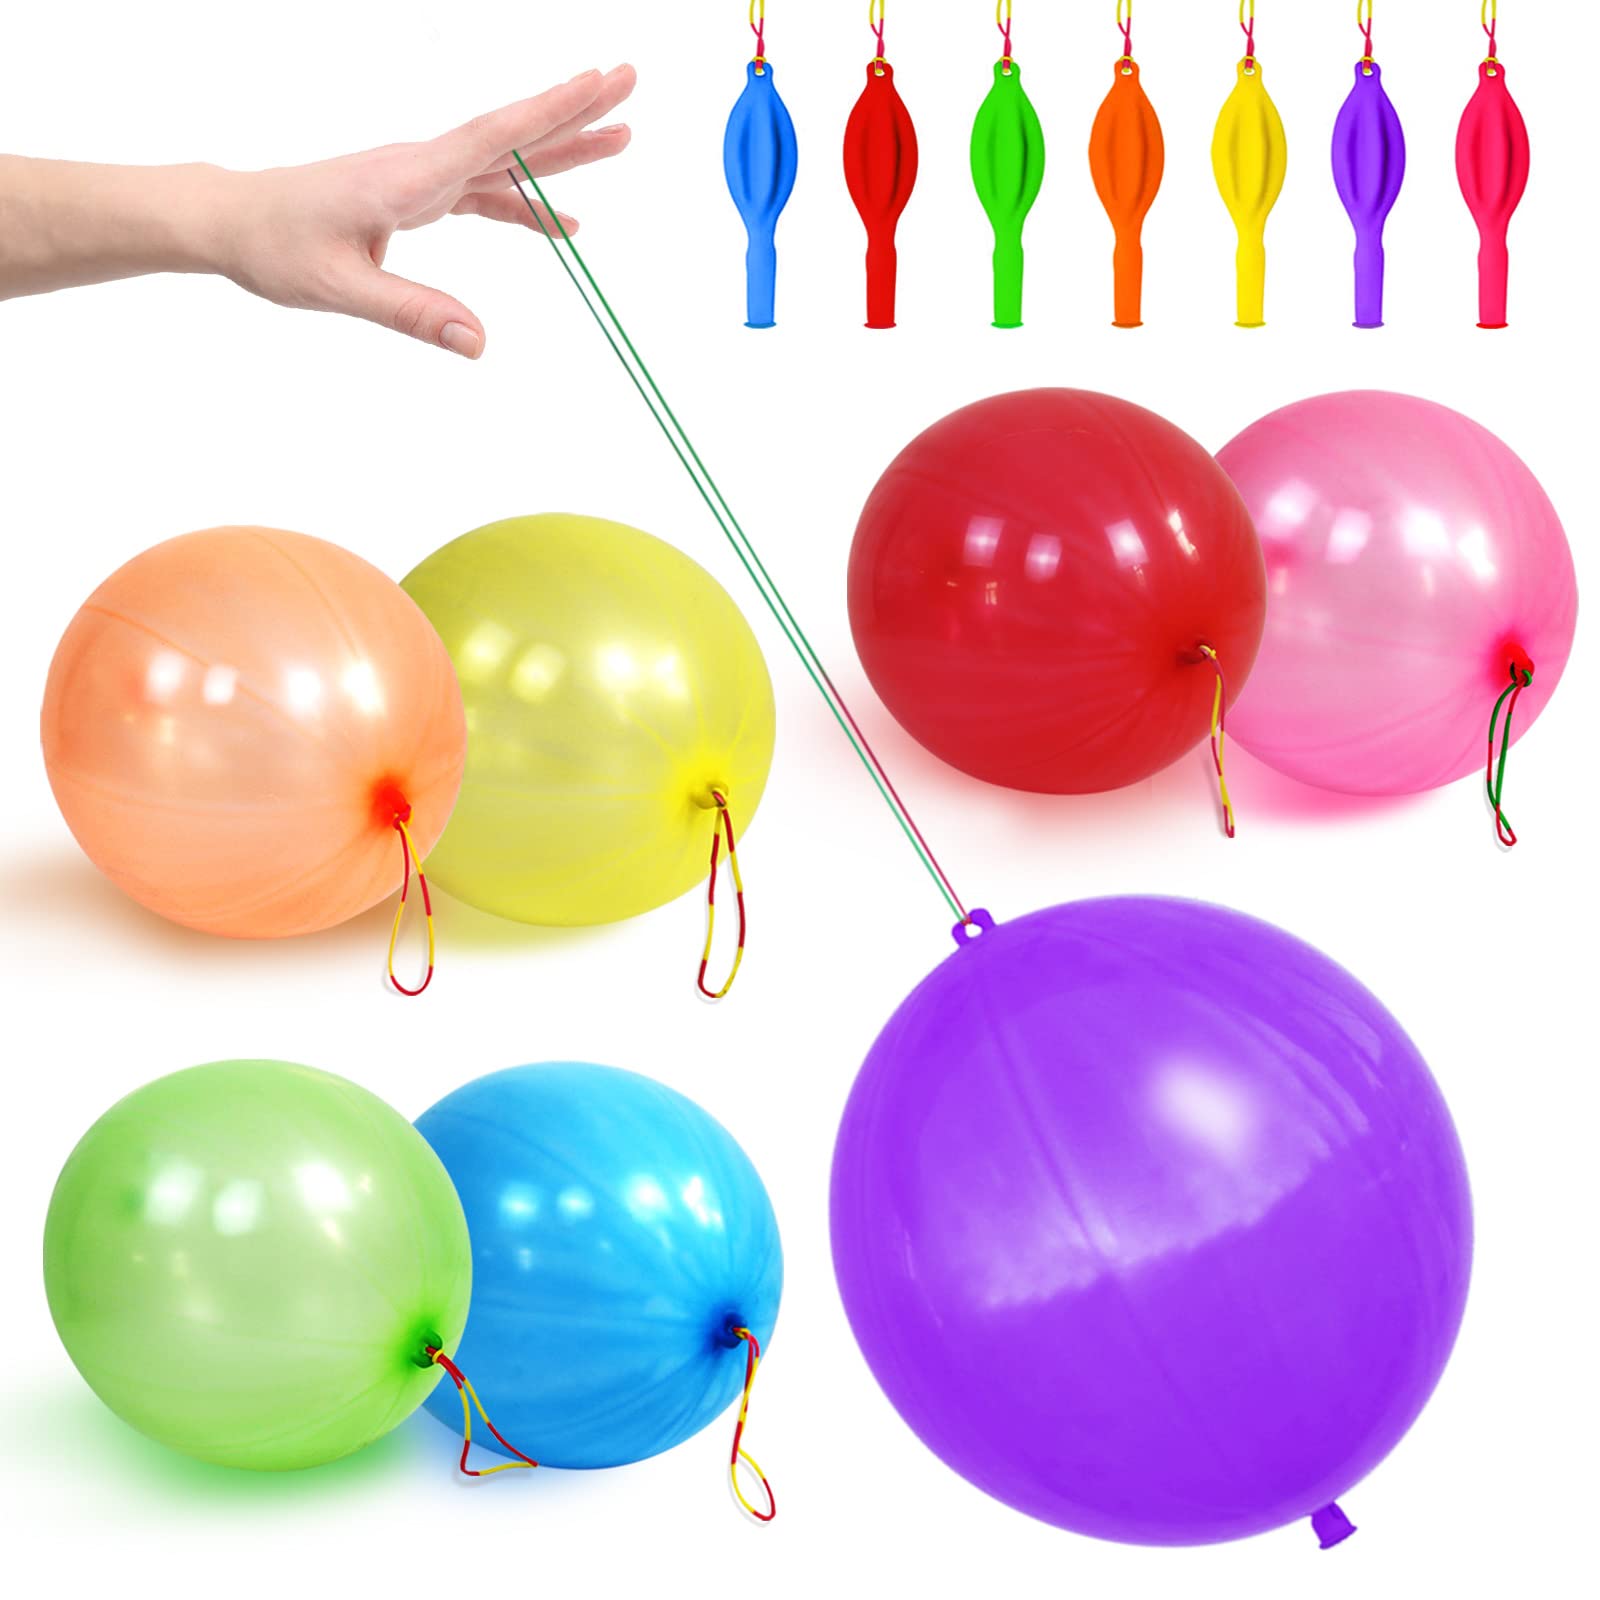 32PCS Punch Balloons Thickened Latex Punching Balloon Assorted Color Bounce Balloons with Upgraded Strong Rubber Band Handle Heavy Duty Party Favors For Kids Birthday Party Wedding Fun Balloons